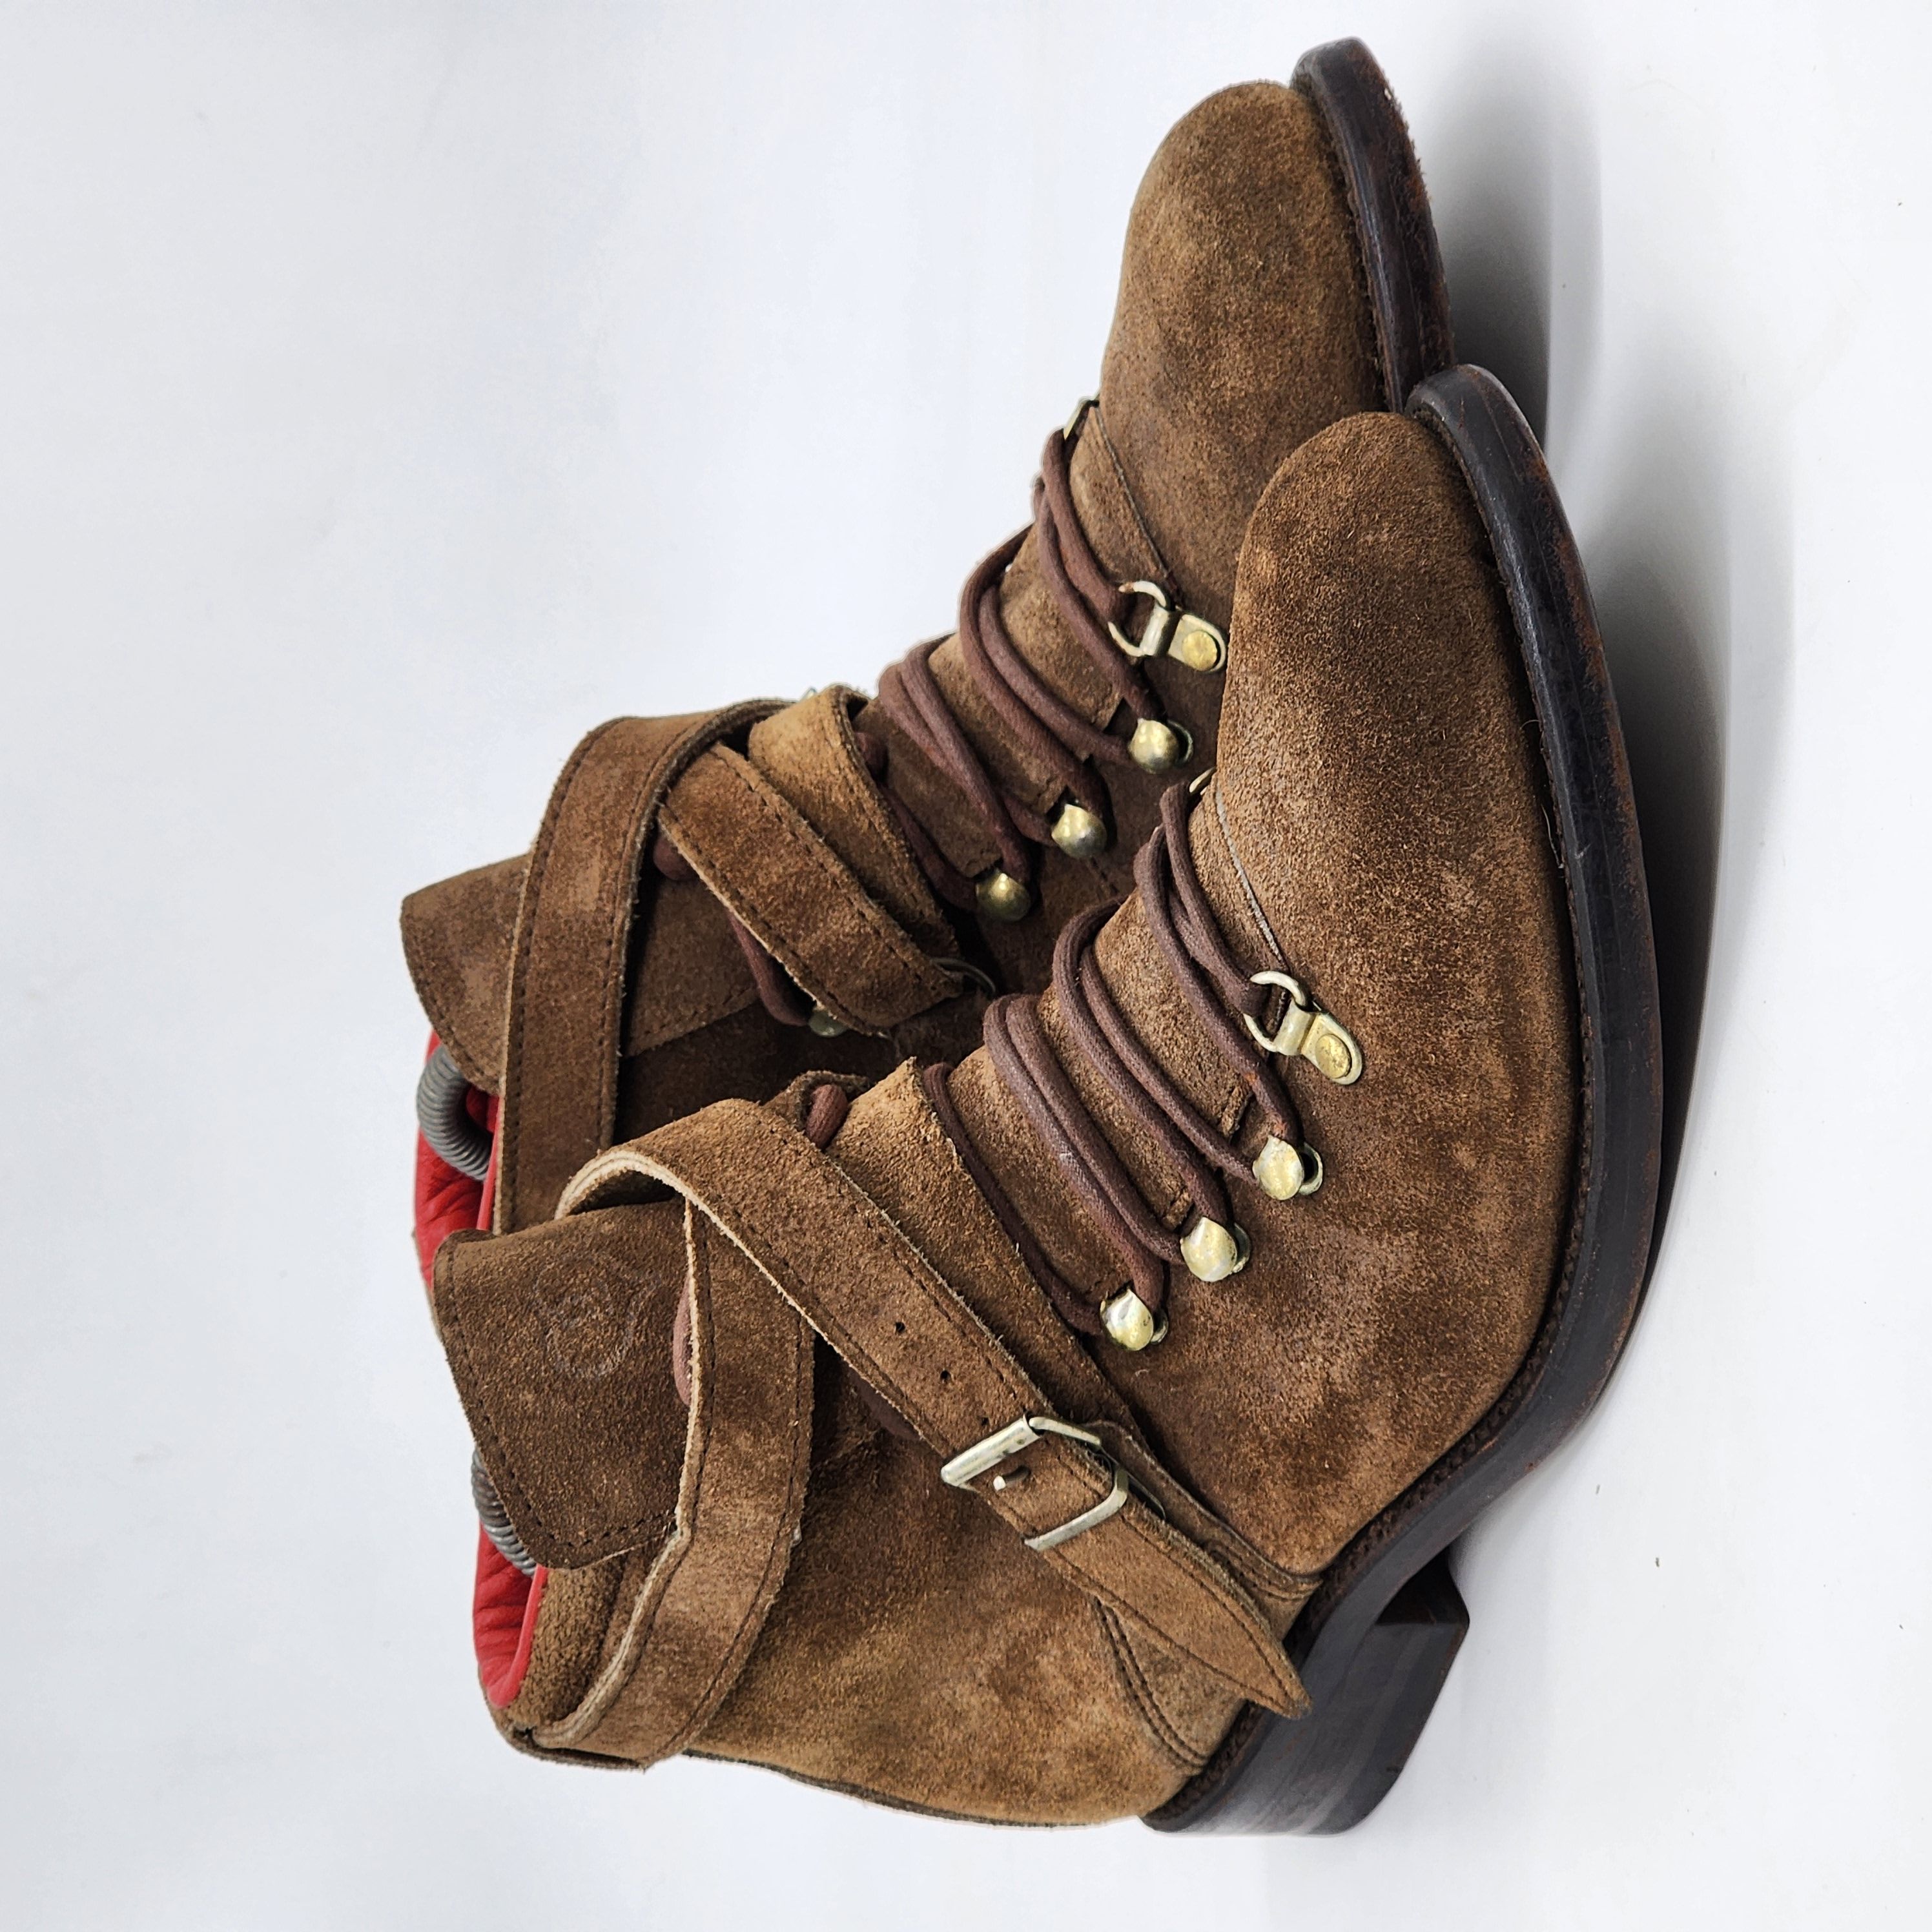 Archival Clothing - Jean Baptiste Rautureau - Archival Strap Hiking Boot - 1